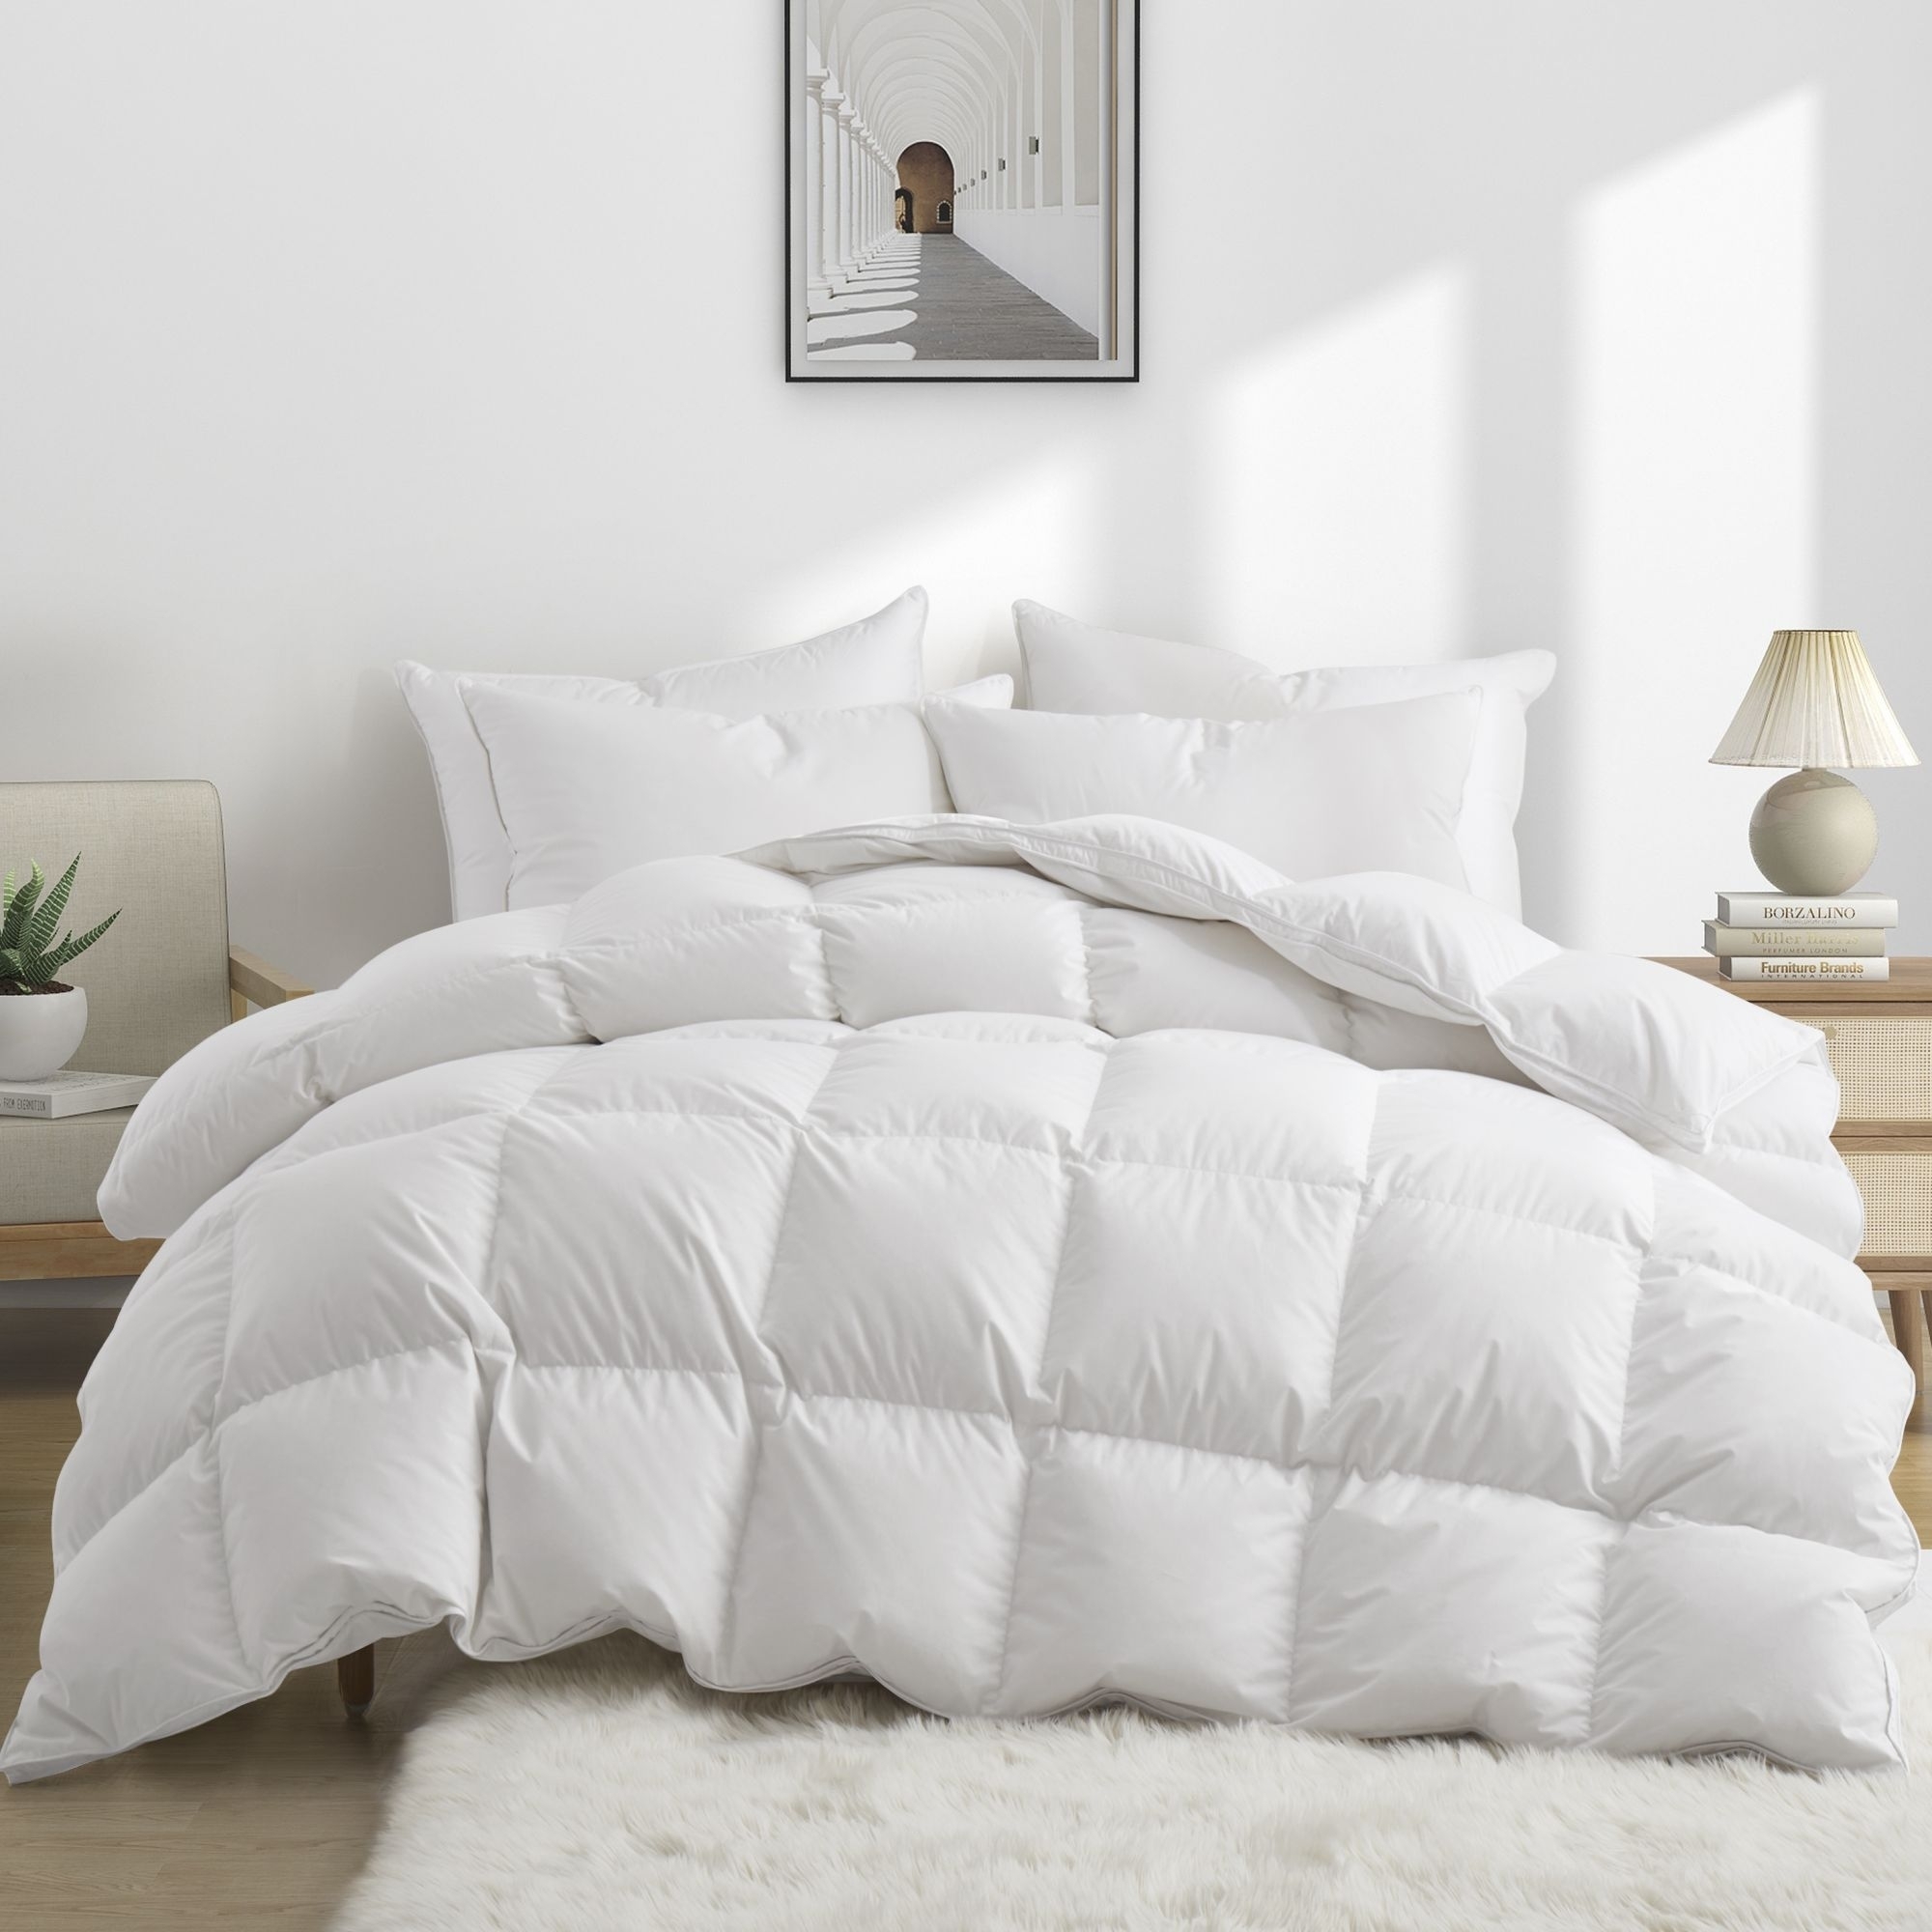 Made In Germany 800 Fill Power Luxurious European White Down Comforter-Heavy Weight Comforter& Medium Weight Comforter - Medium Weight, King